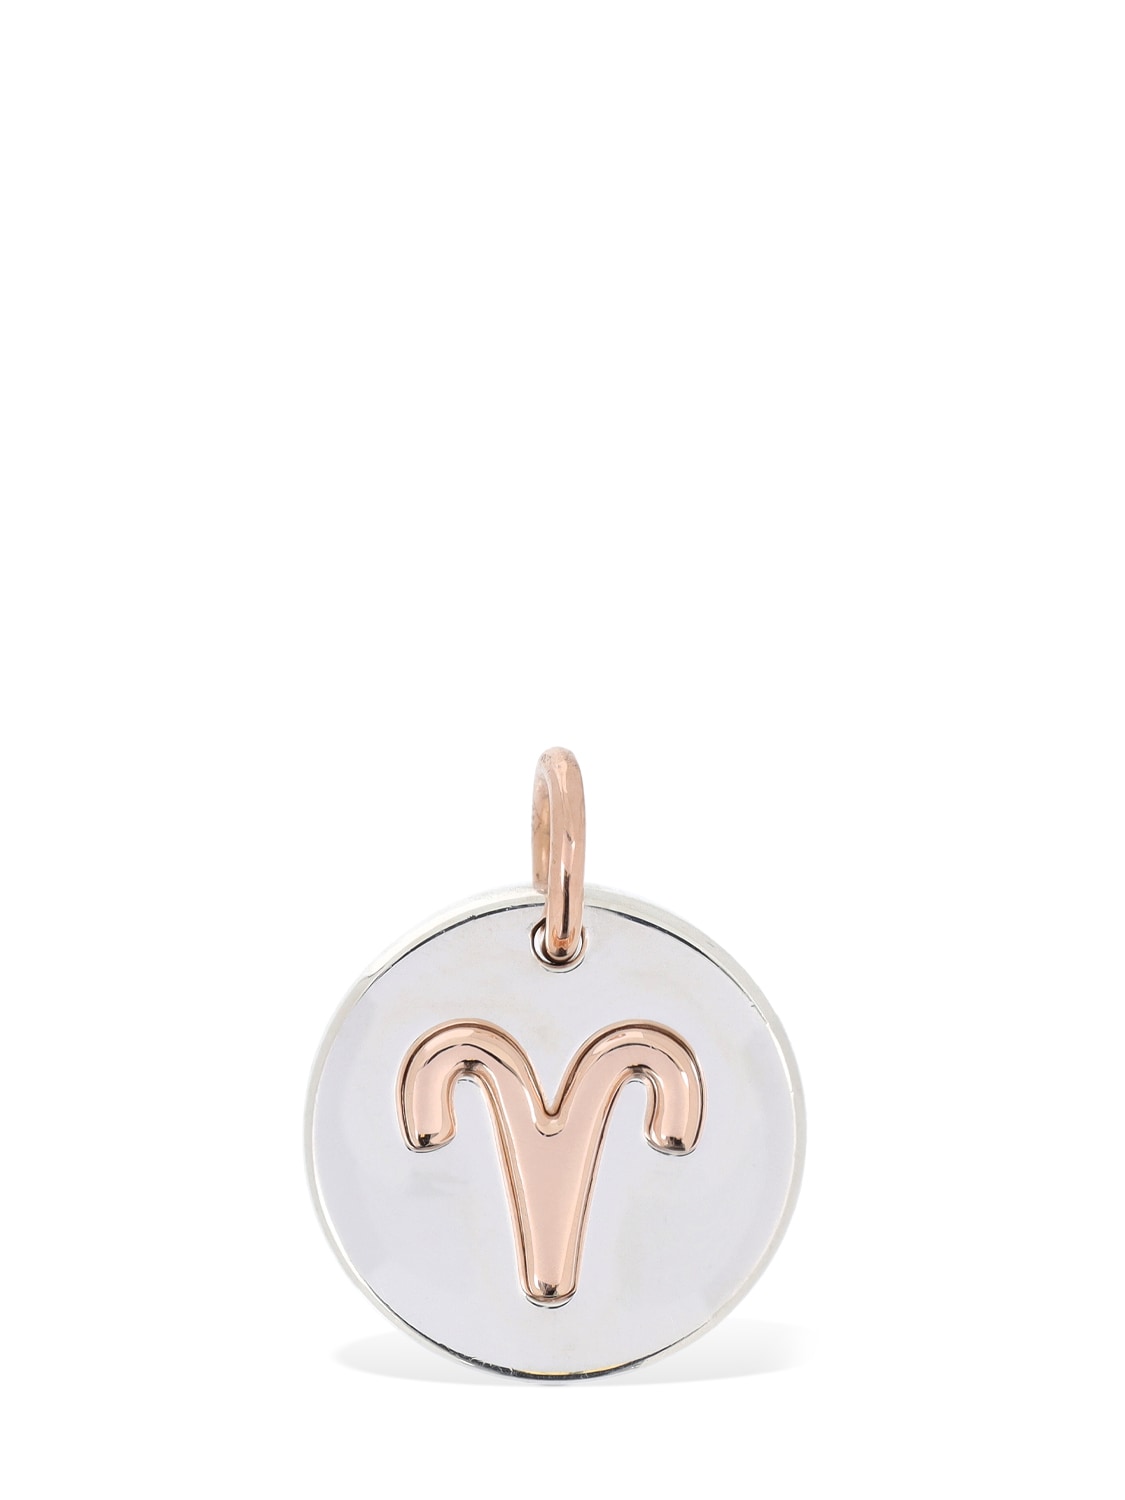 DODO 9kt Rose Gold & Silver Aries Charm